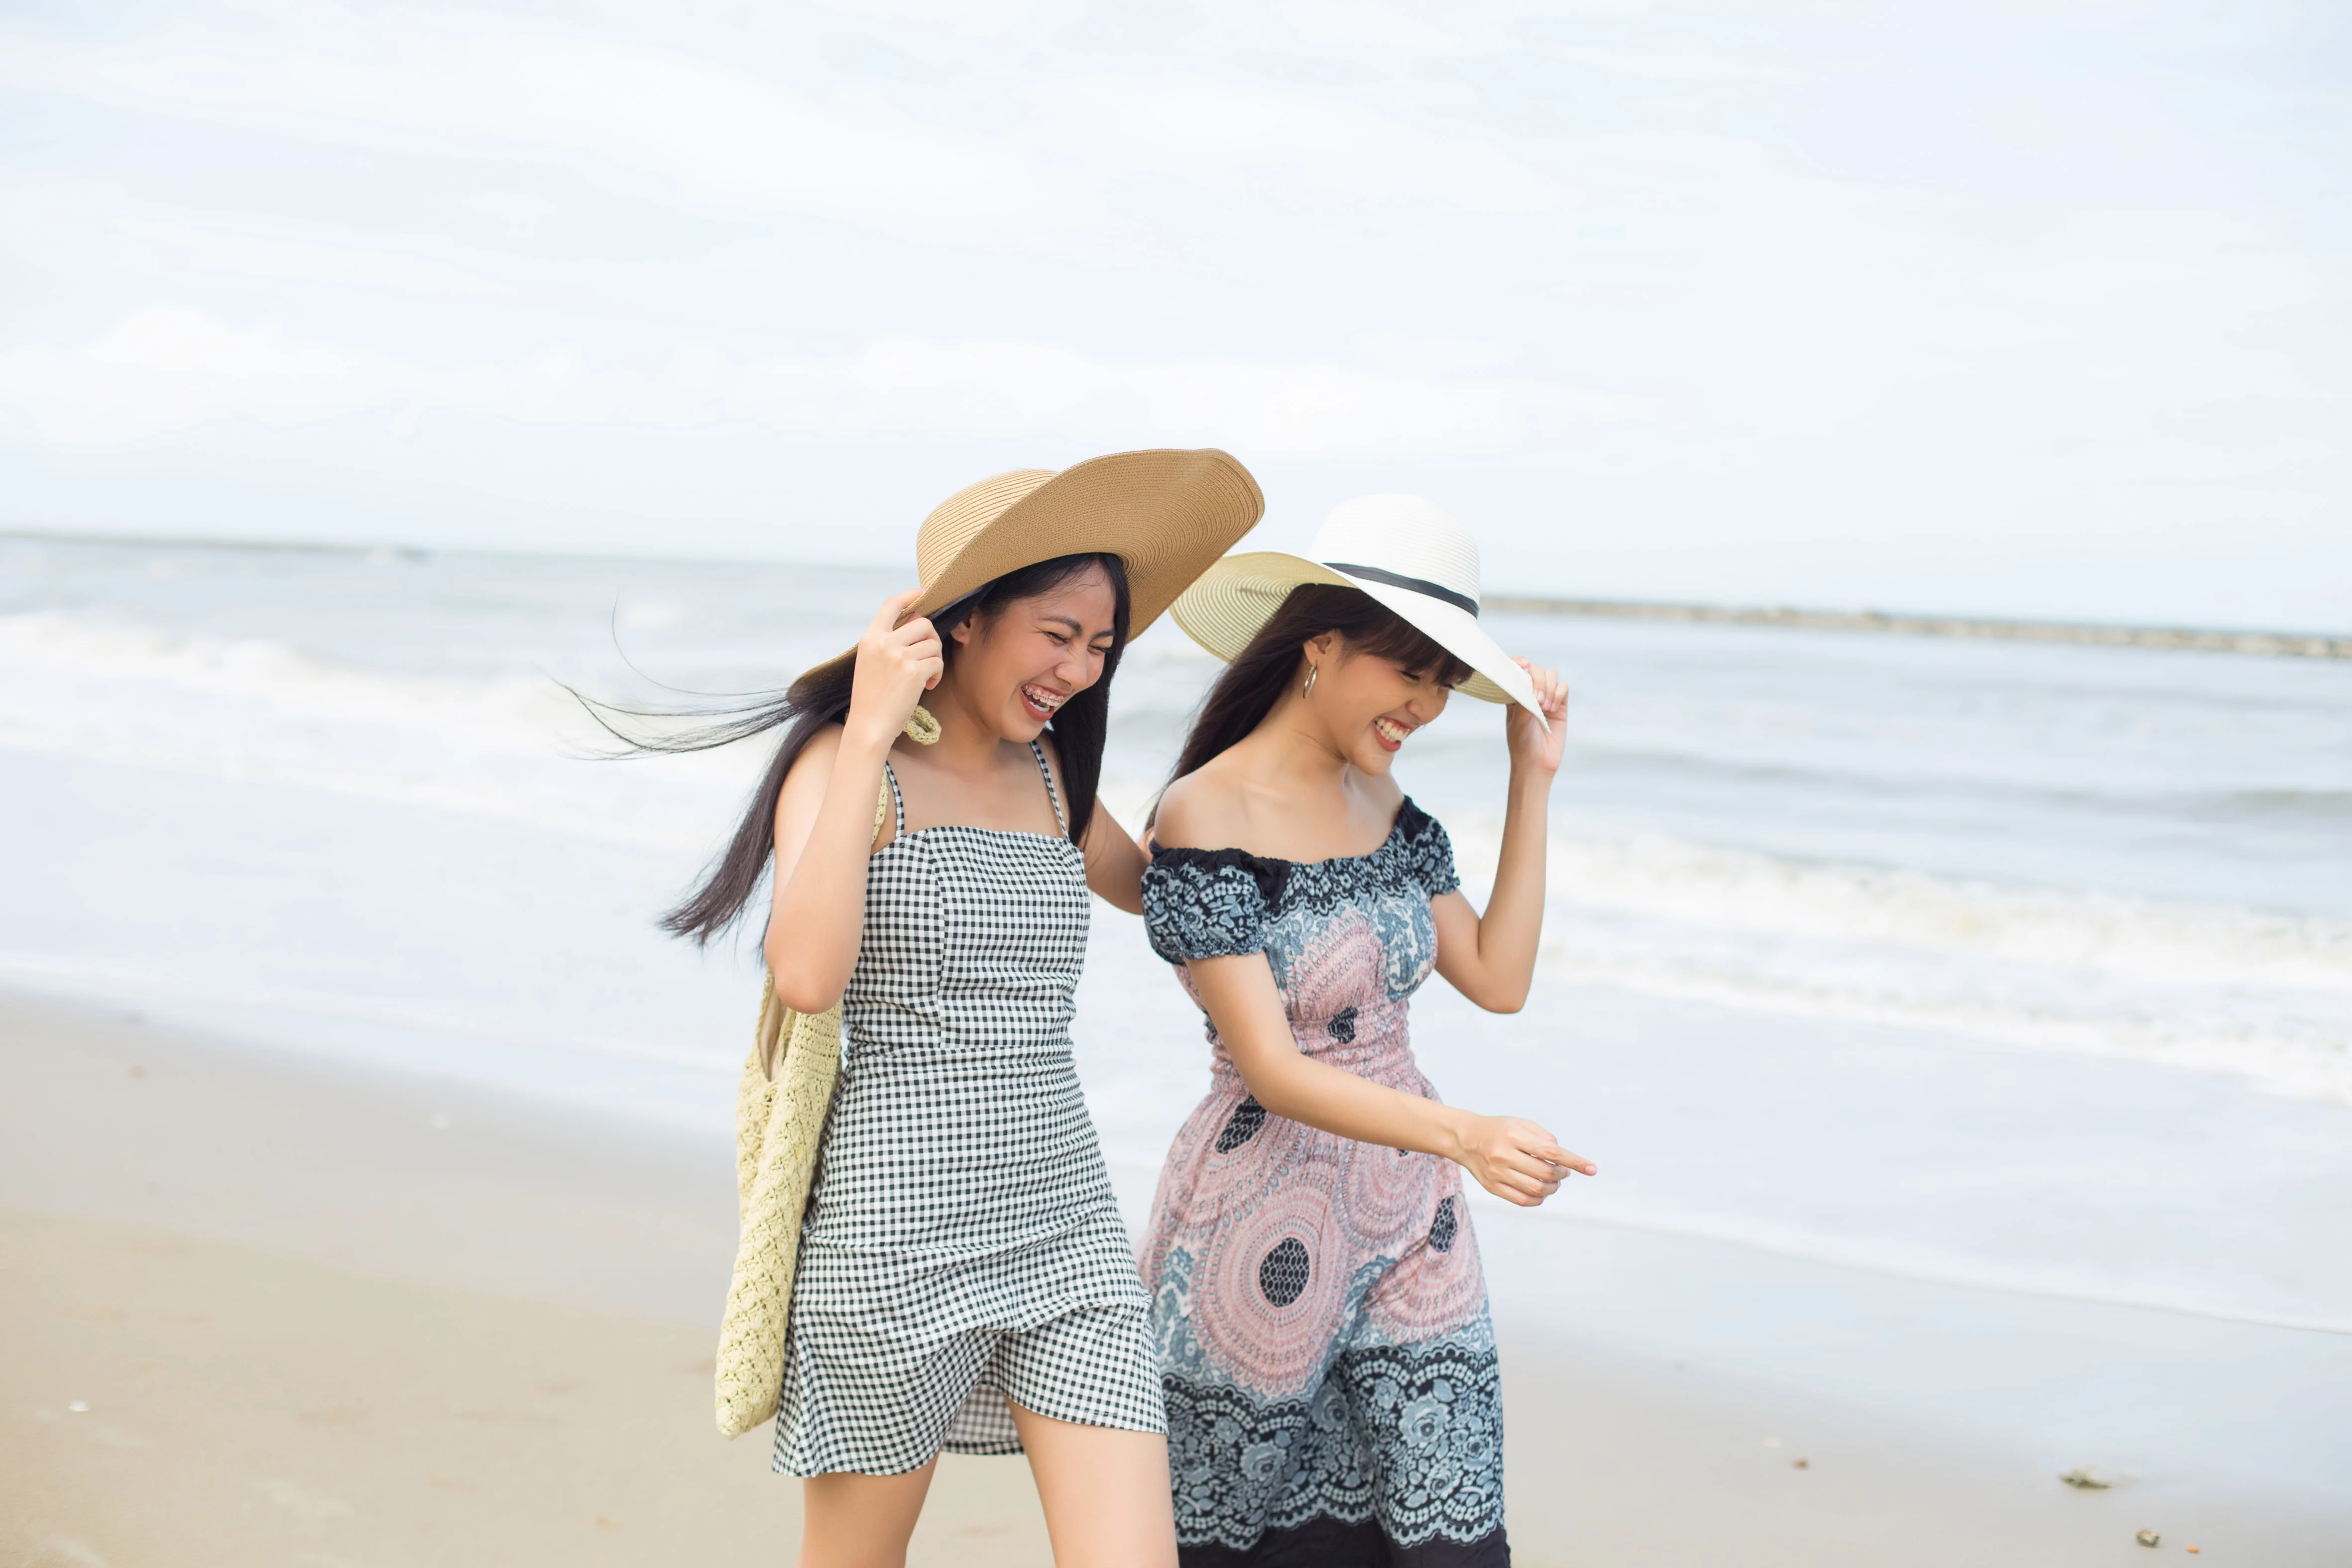 Two women laughing while holding their hats and walking on the beach